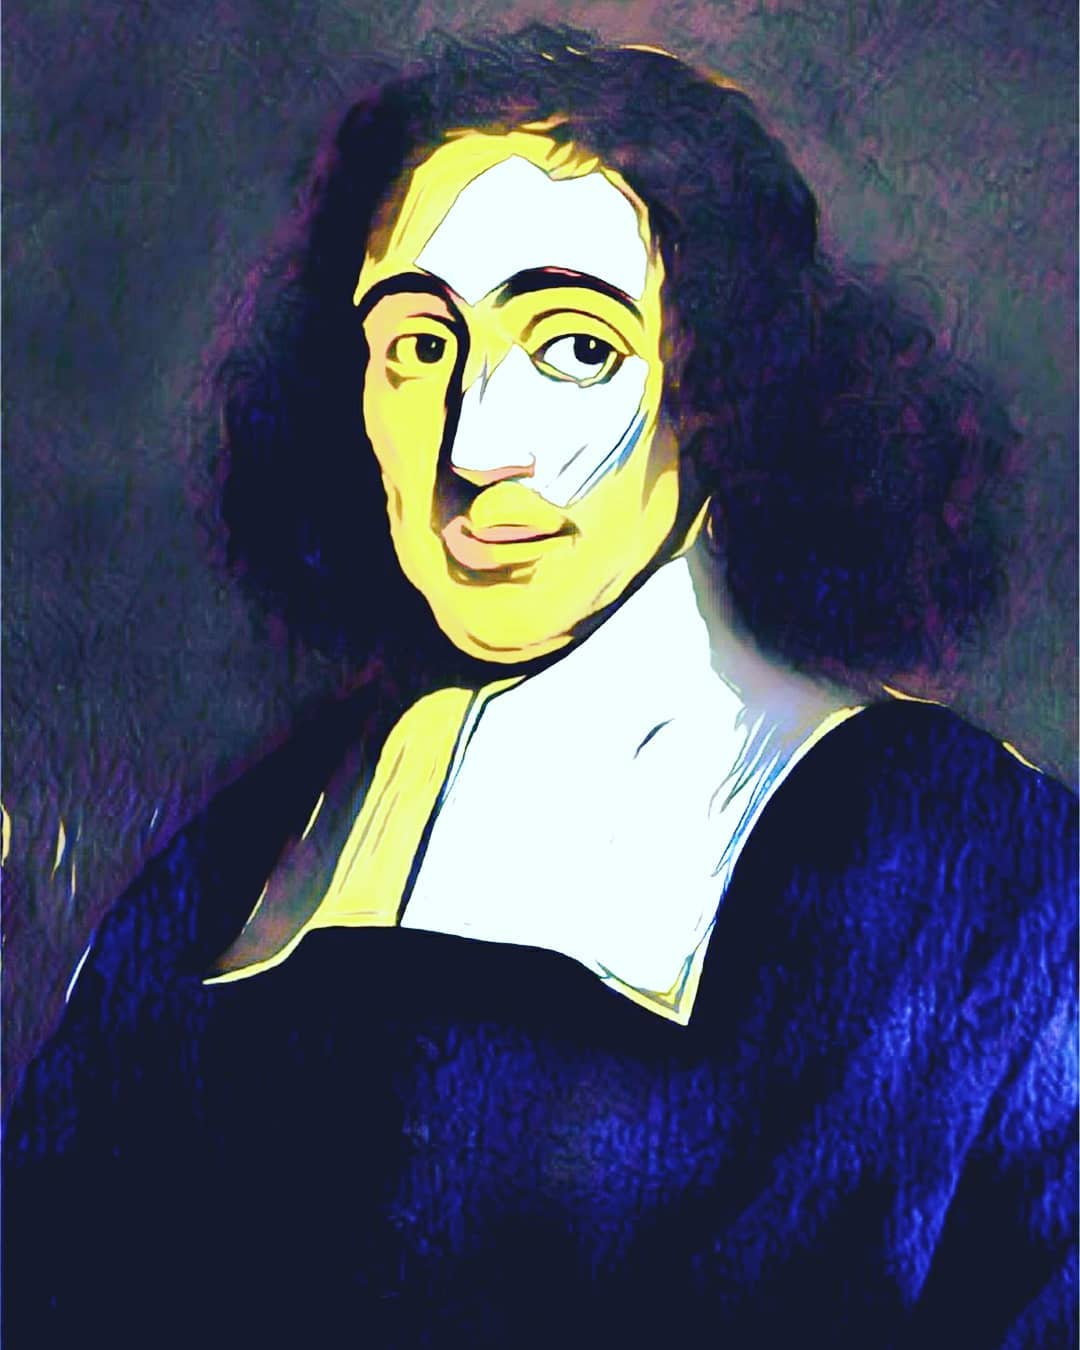 9 Quotes from Spinoza, One of the Important Names of Philosophy